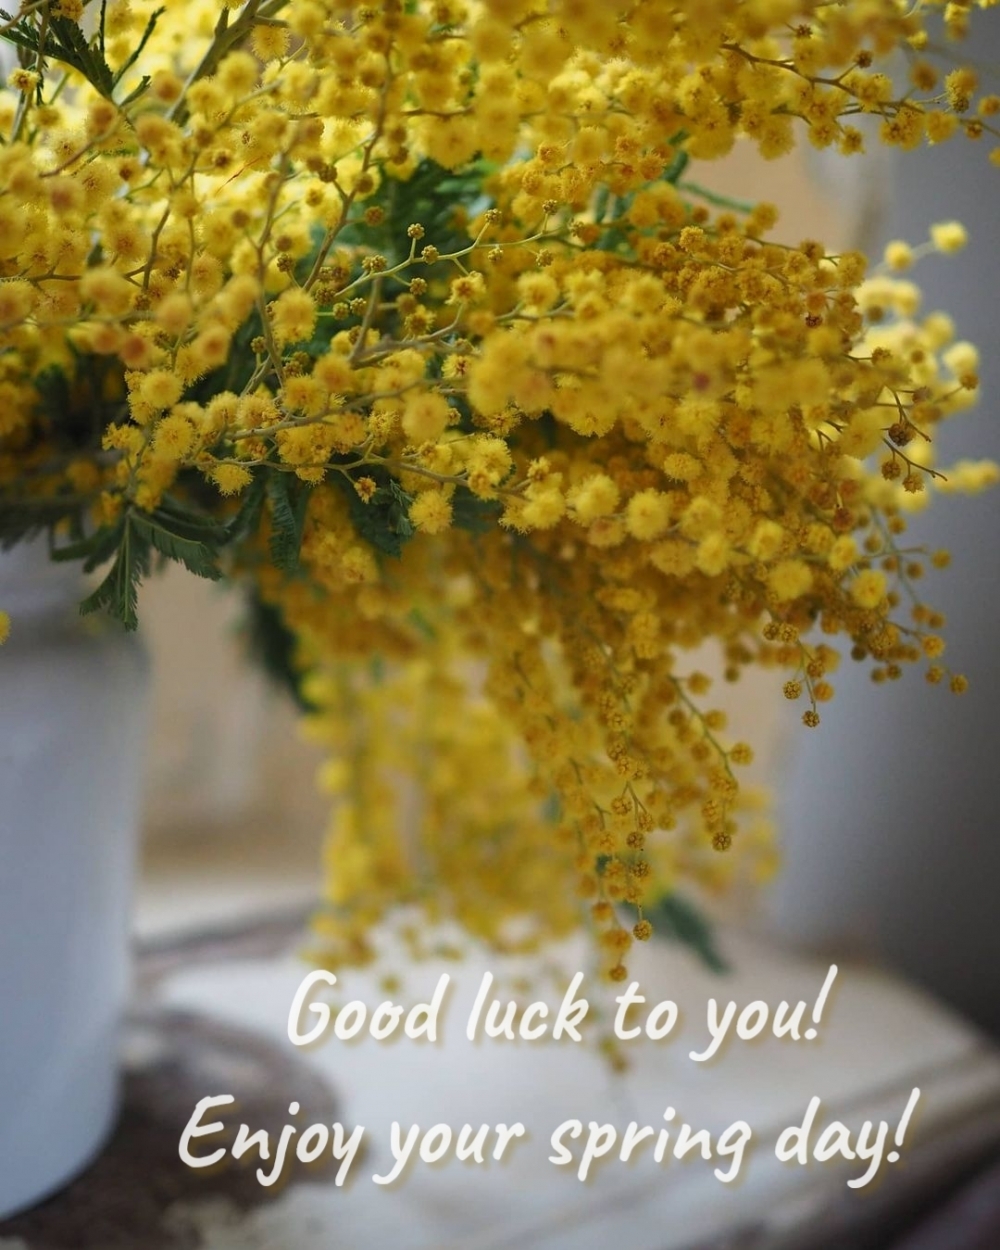 Good luck to you! Enjoy your spring day!